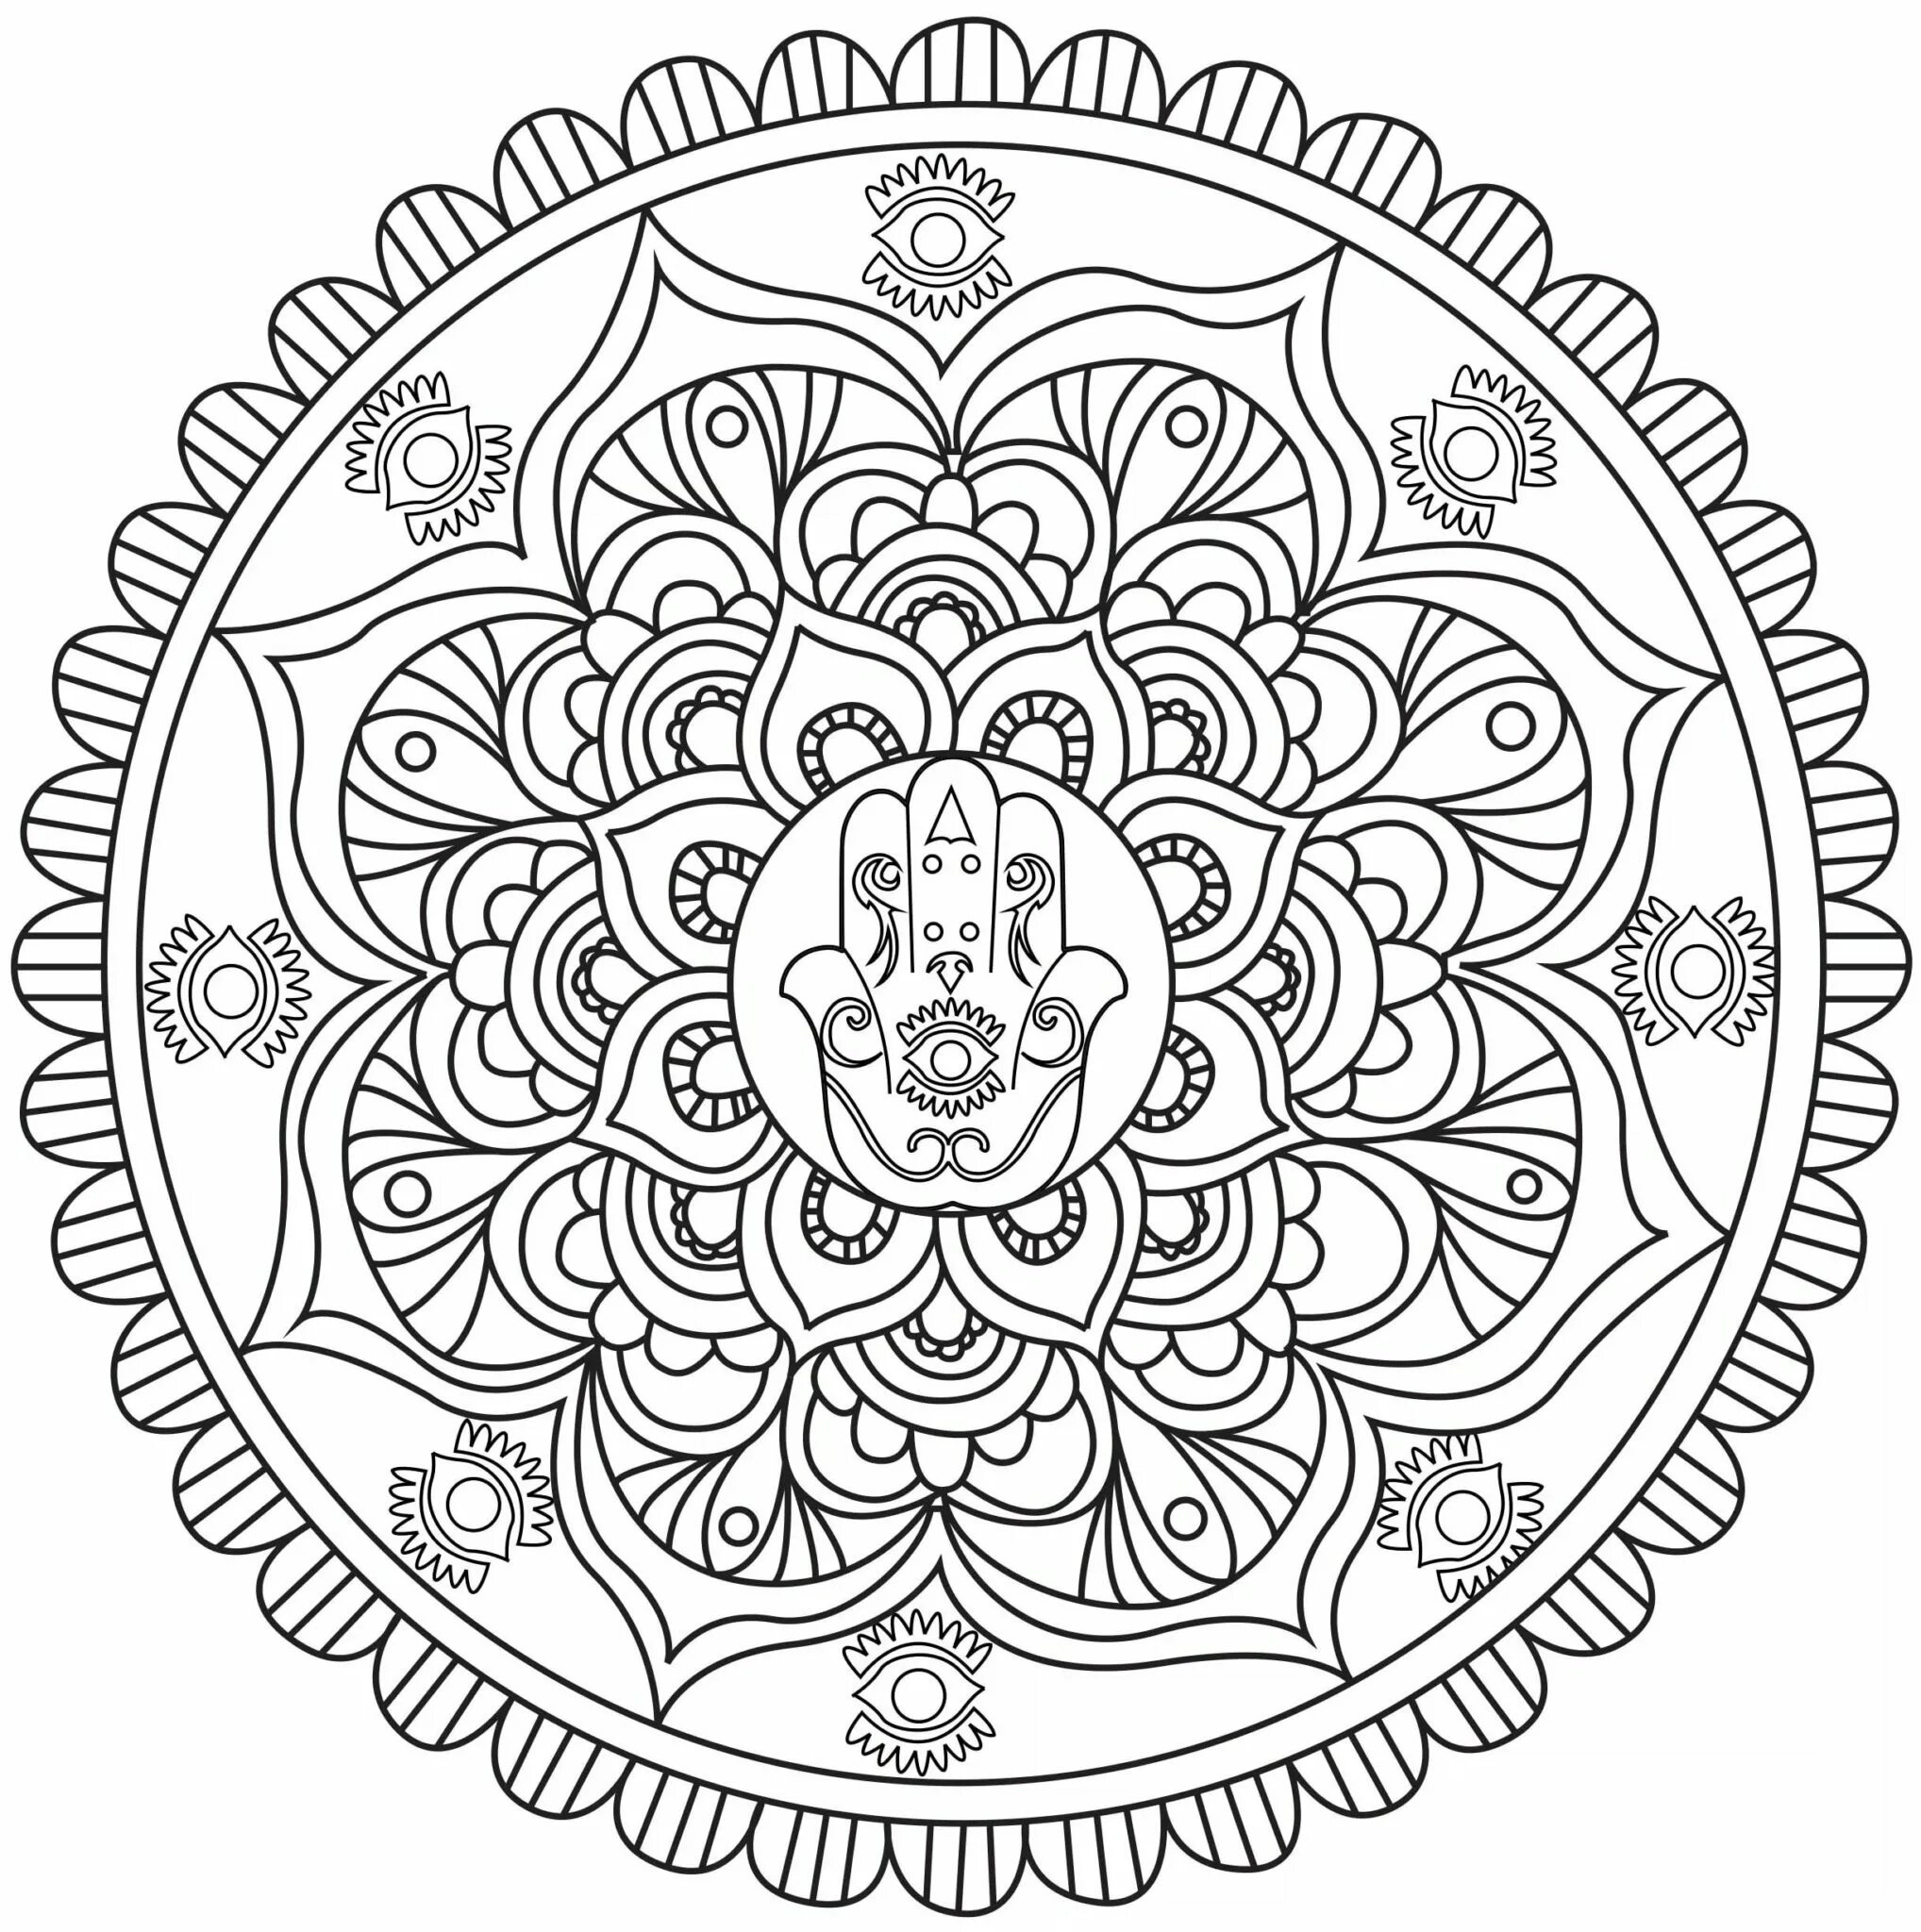 Mandala for good luck and success in everything #11